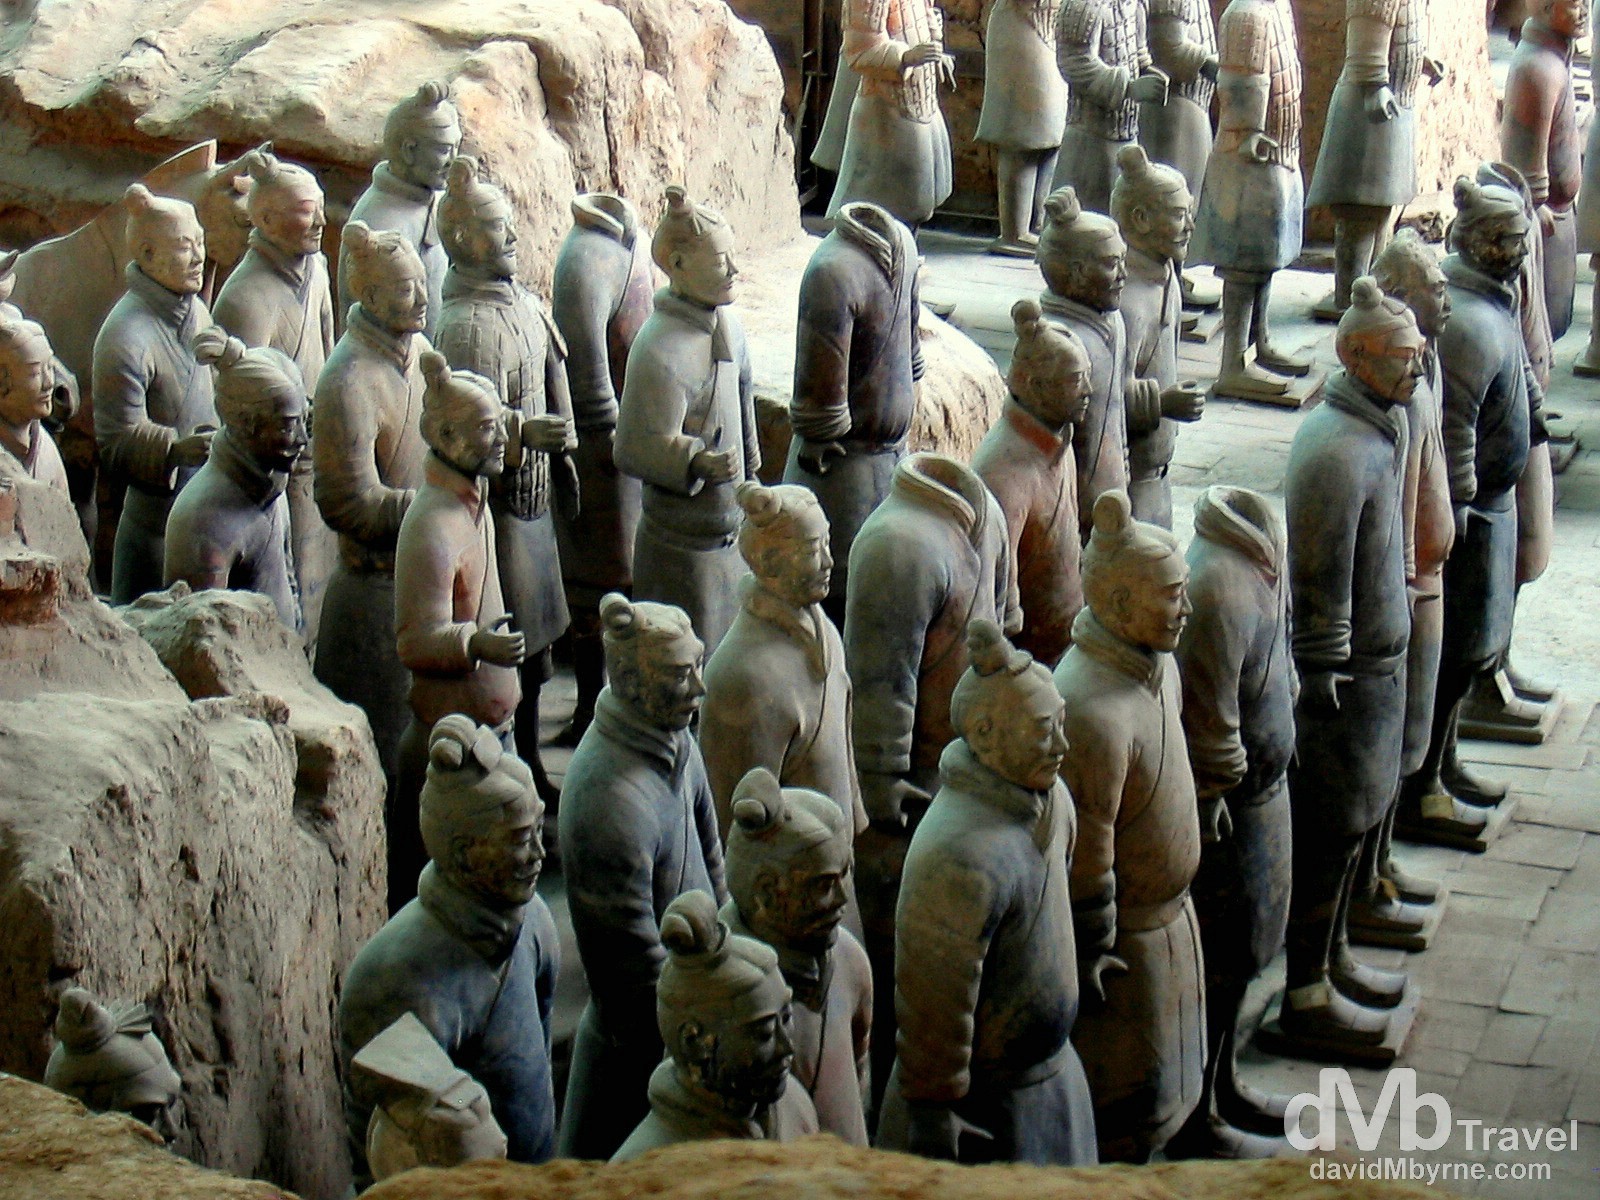 Vault 1 of the Terracotta Army on the outskirts of Xi'an, Shaanxi Province, China. September 30th, 2004.